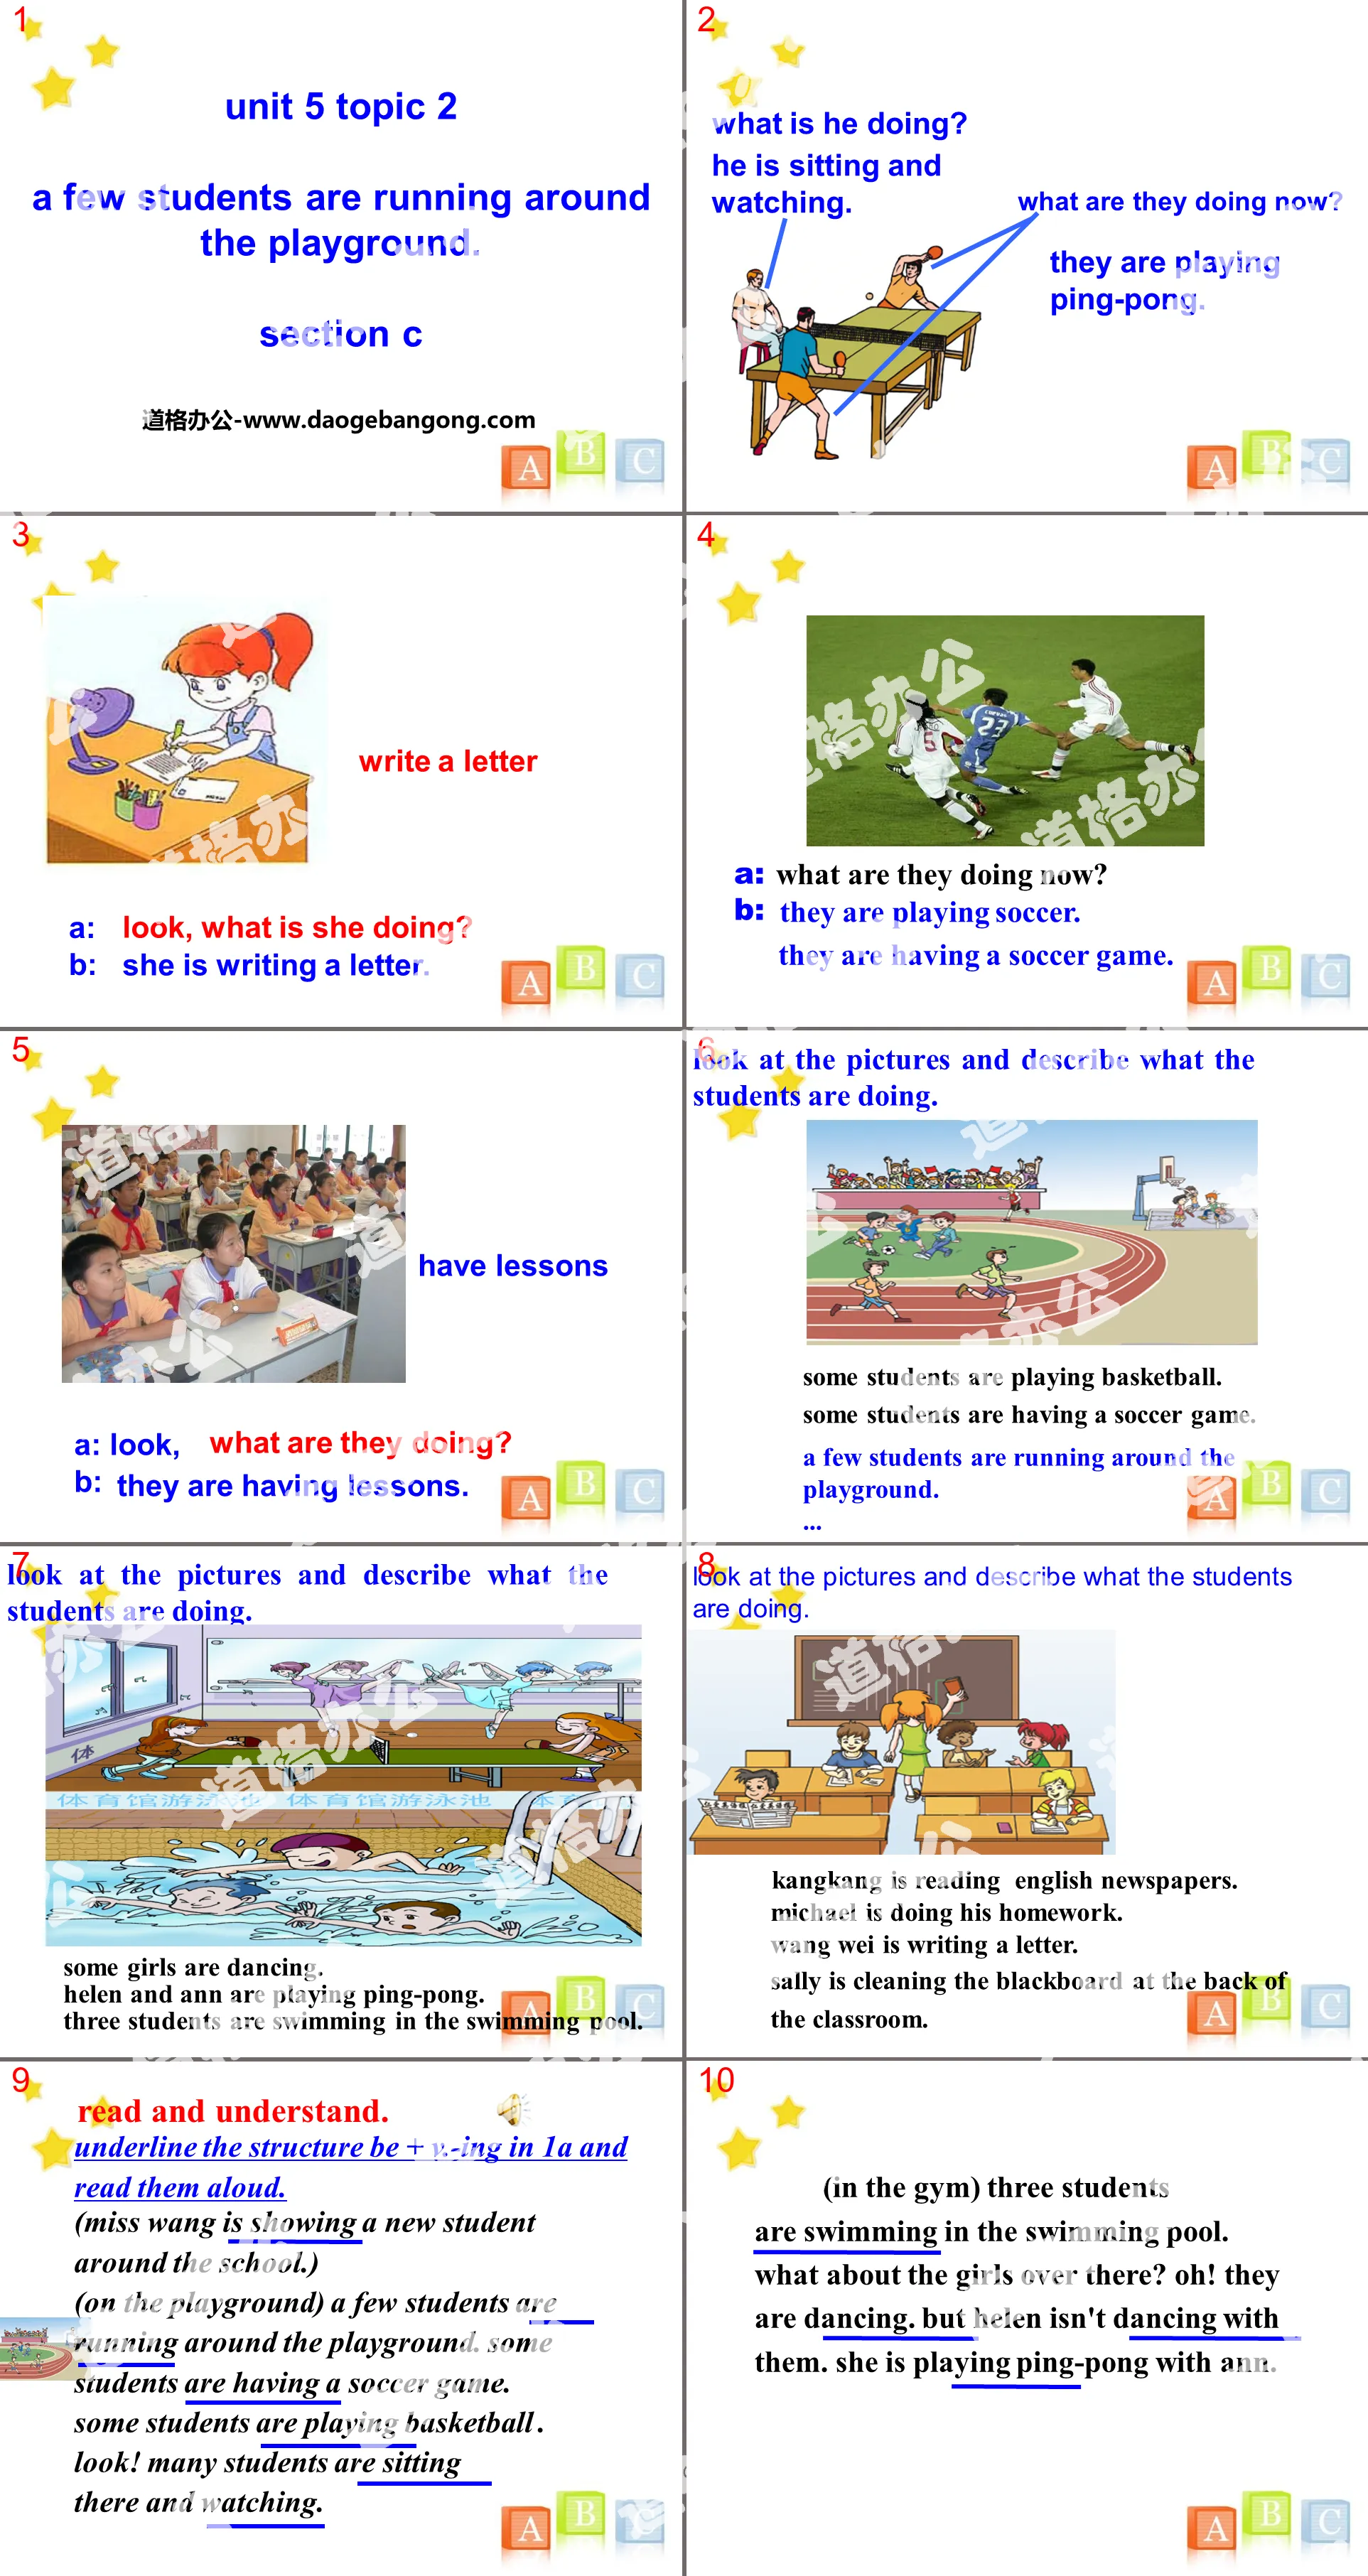 《A few students are running around the playground》SectionC PPT
